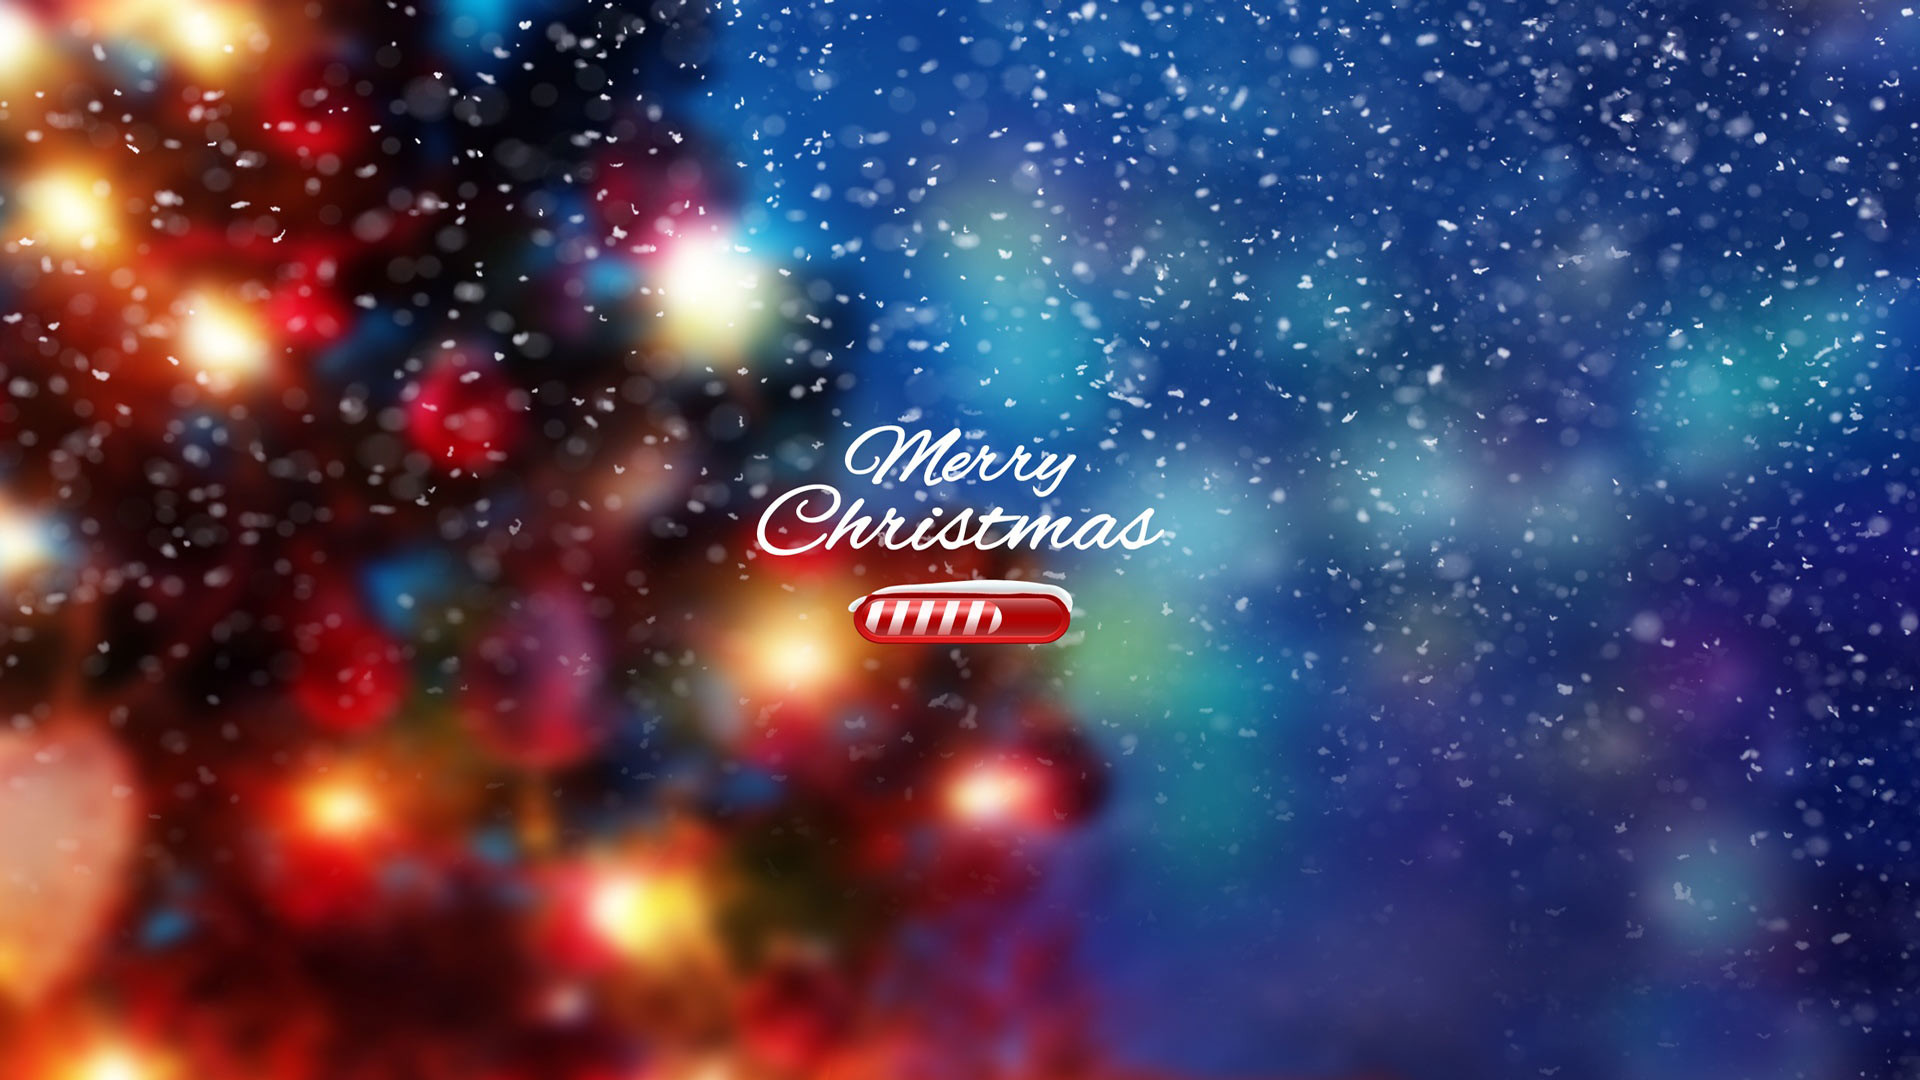 1920x1080 Christmas Wallpapers | Wallpapers, Backgrounds, Images .